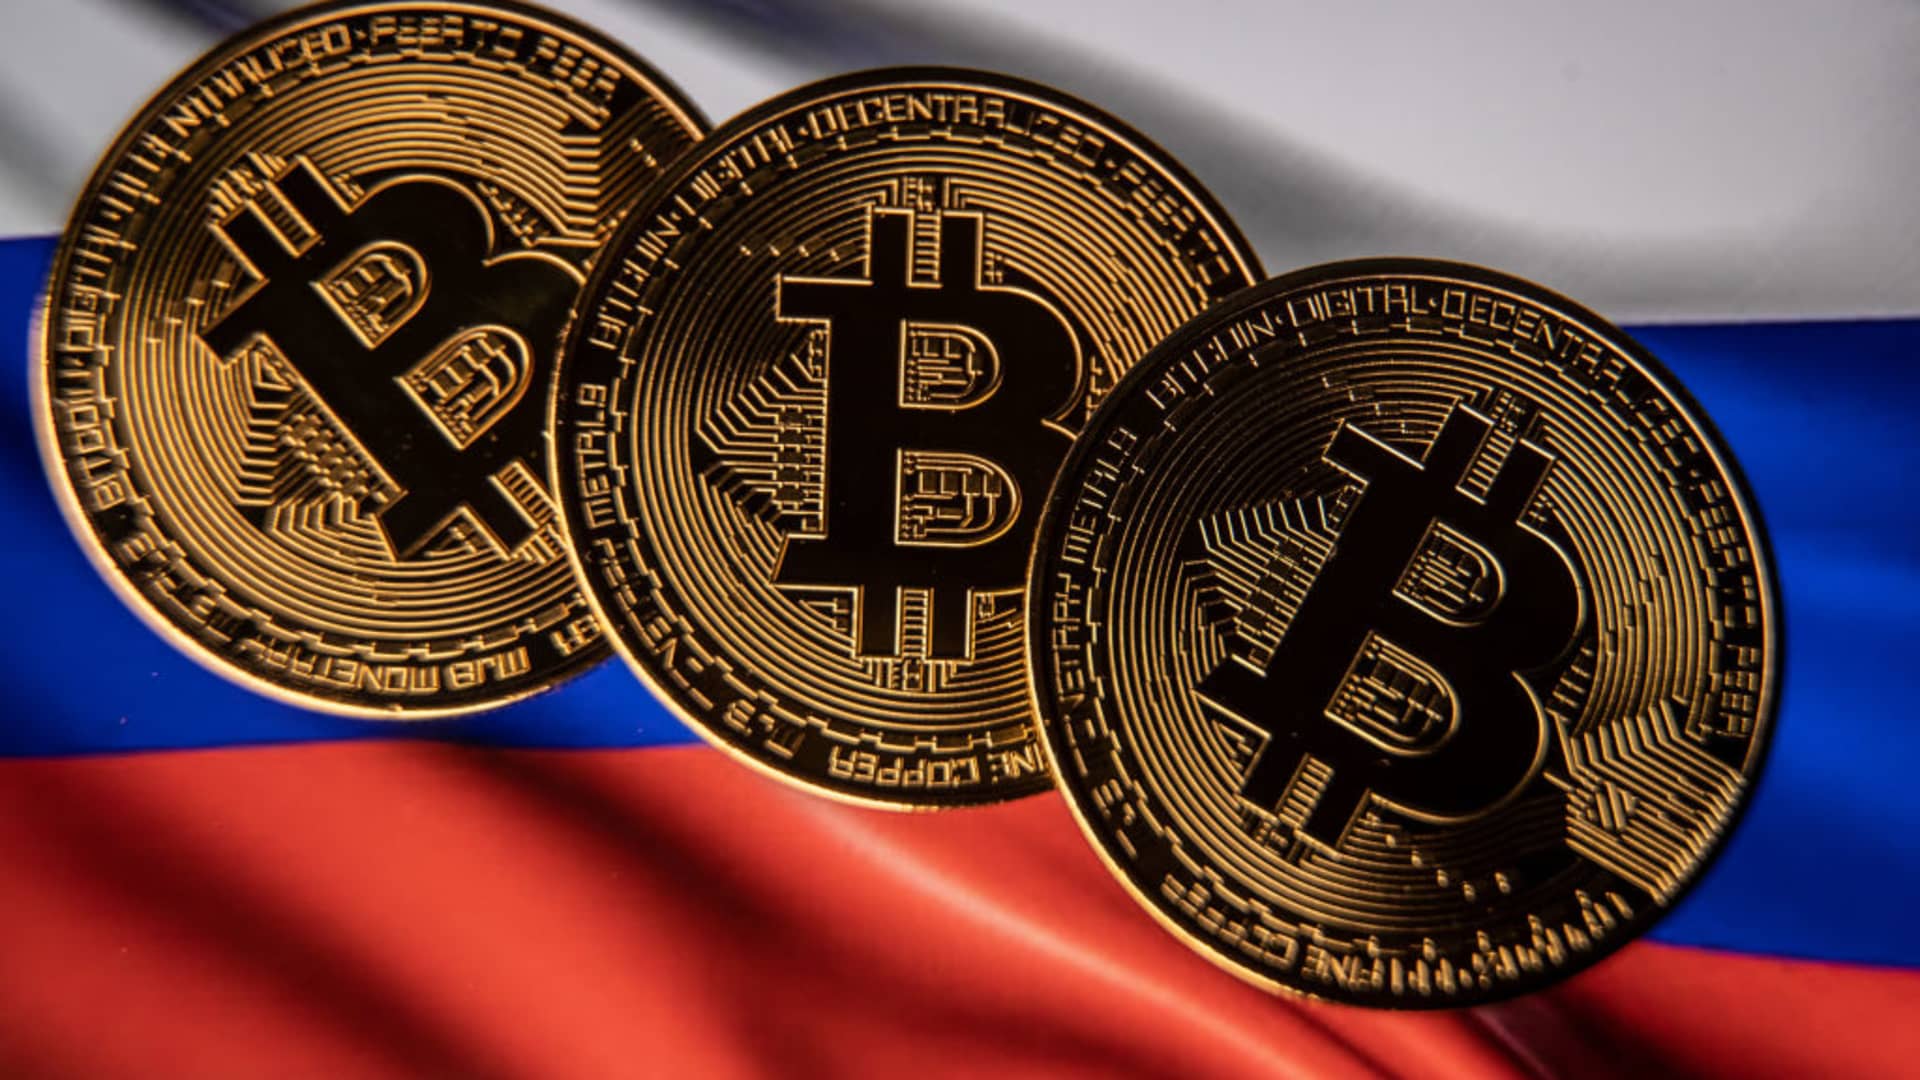 Pro-Russian groups are raising cryptocurrency to prop up military operations